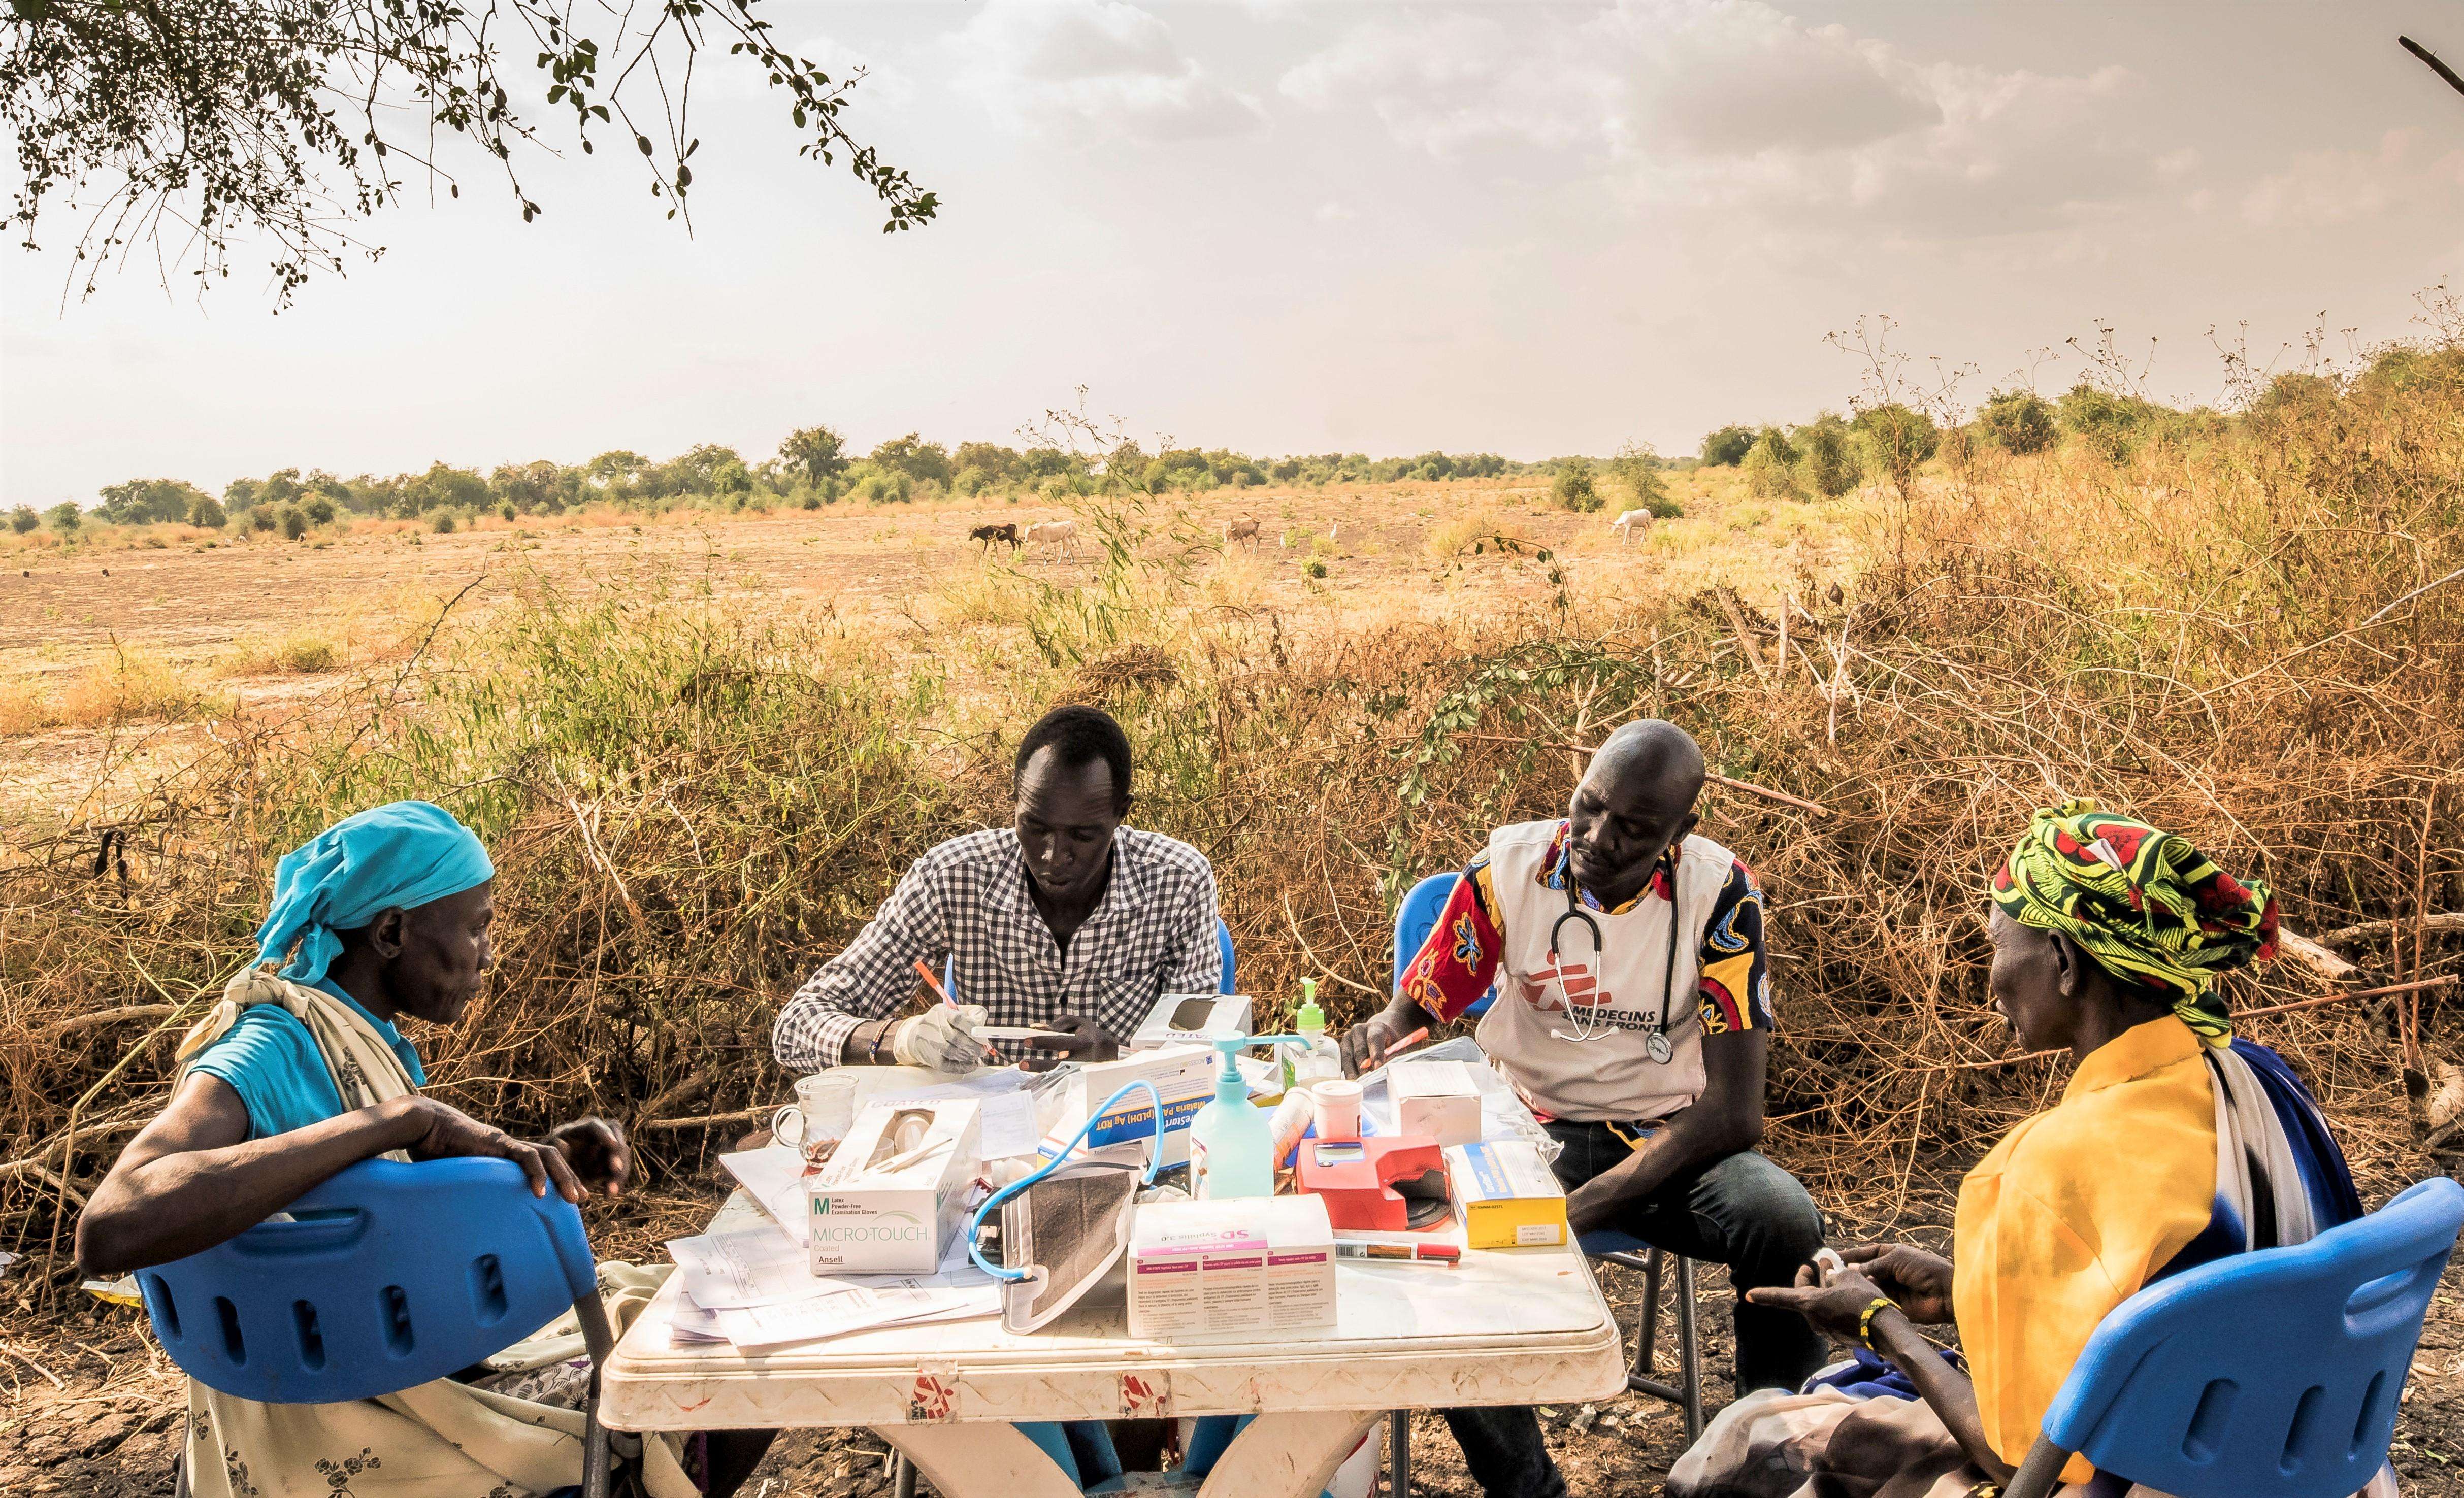 In the shade of a tree, mobile medical staff provide health consultations. Once per week, MSF sets up its medical clinic under trees in the village of Kier, on the banks of the Pibor River.